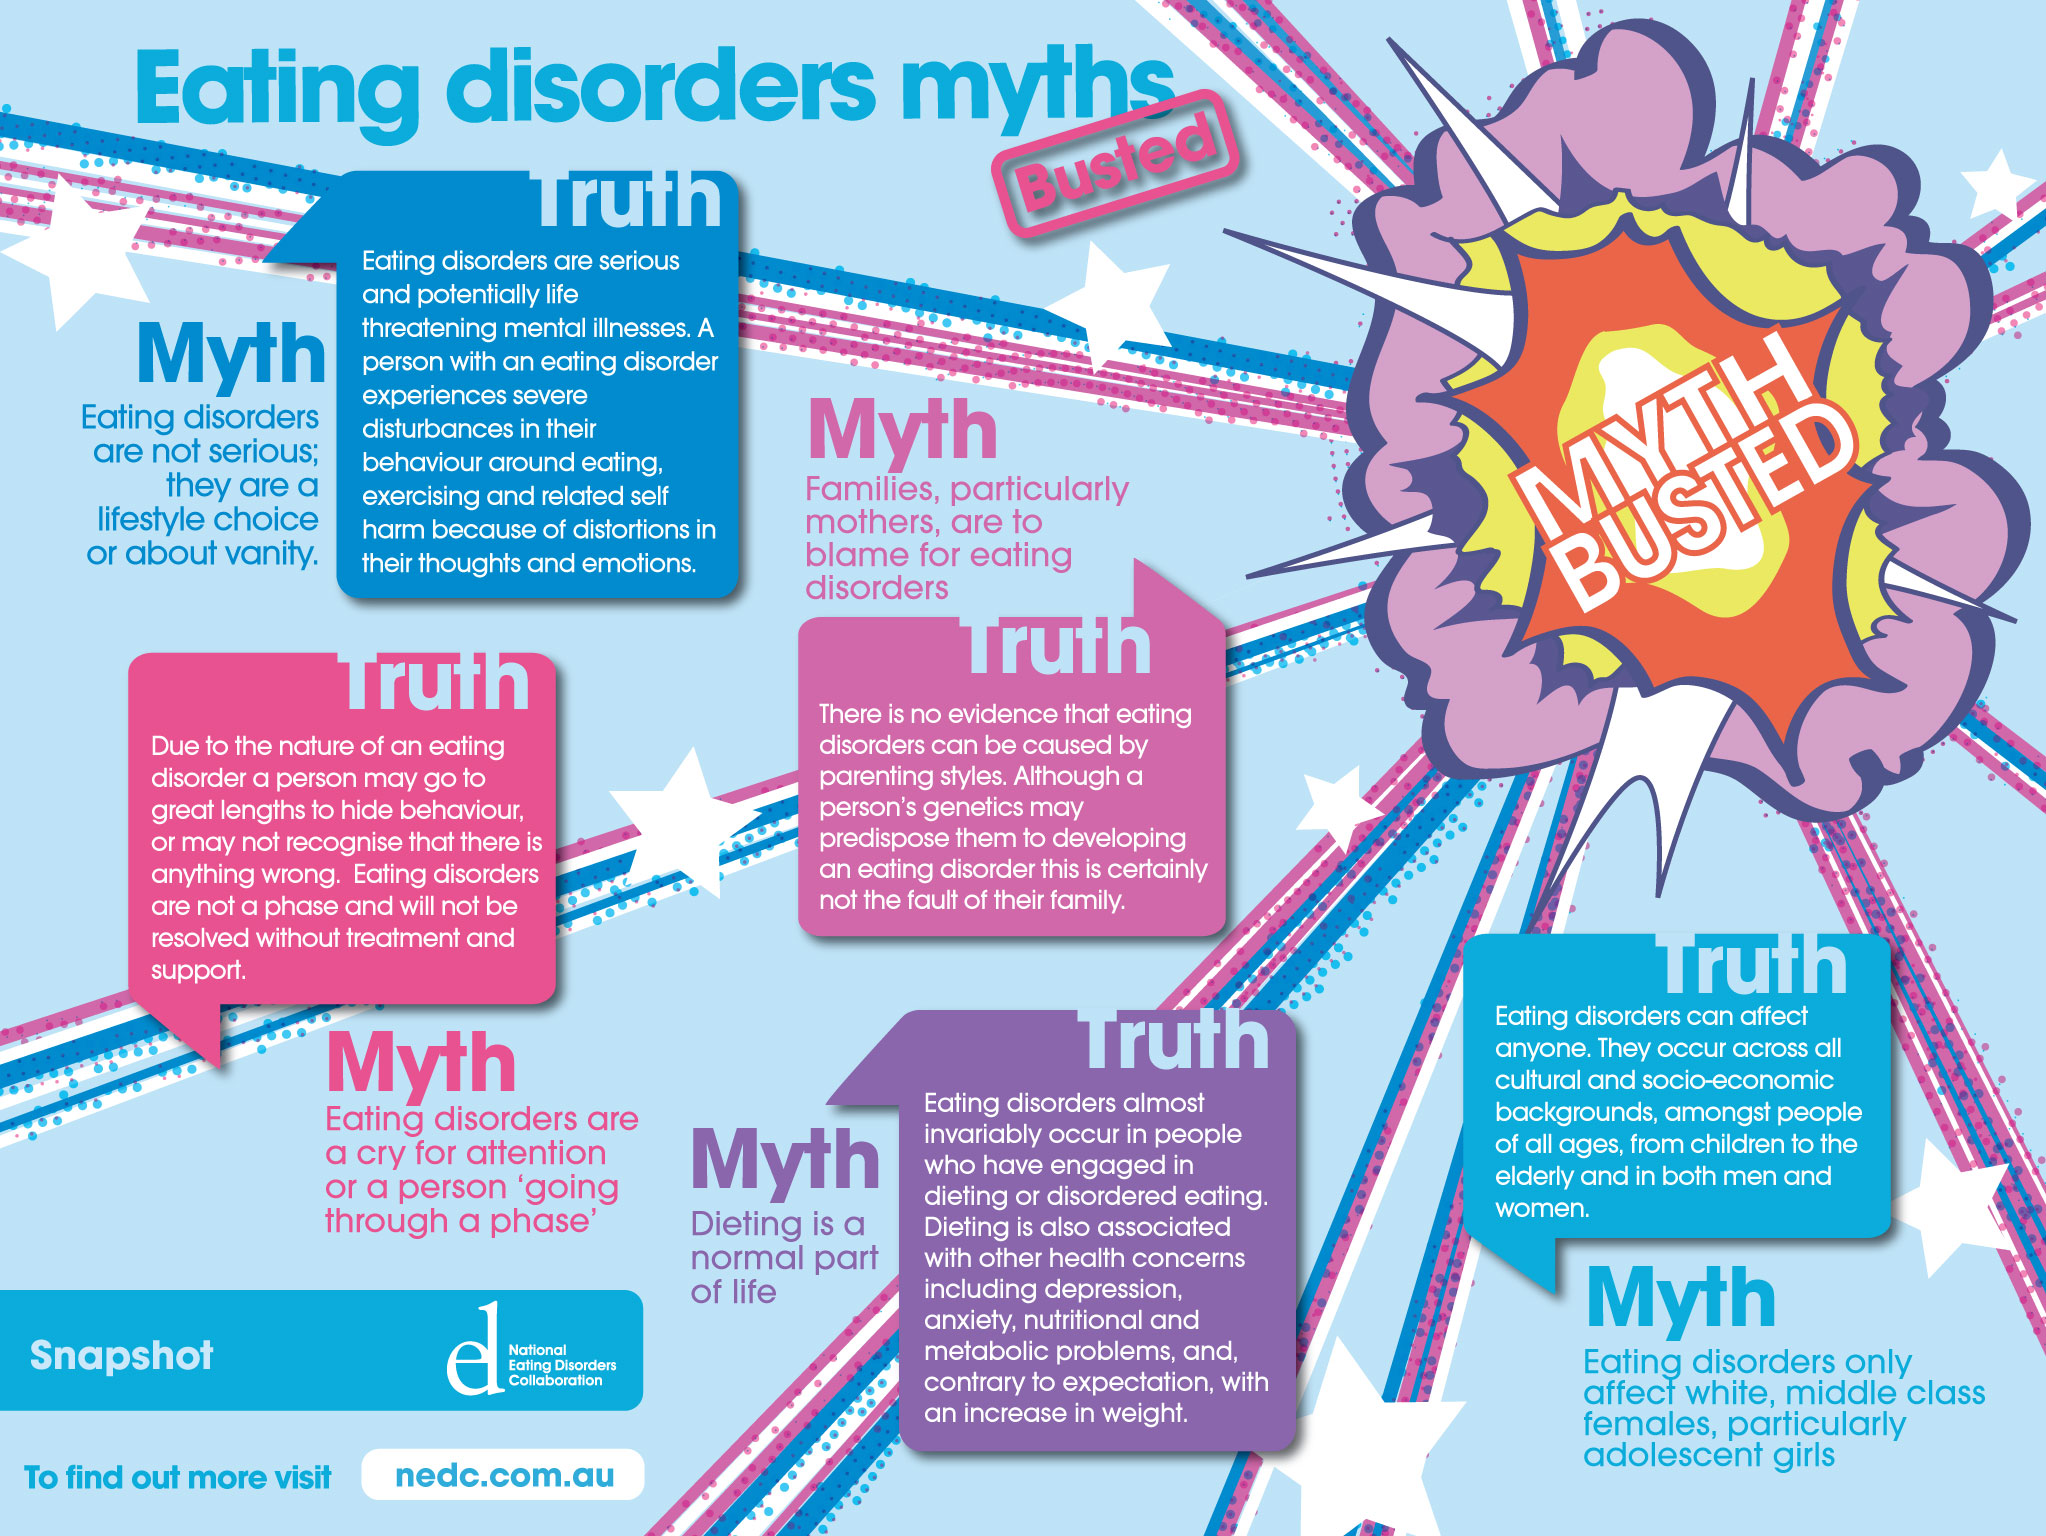 Misconceptions about eating disorders